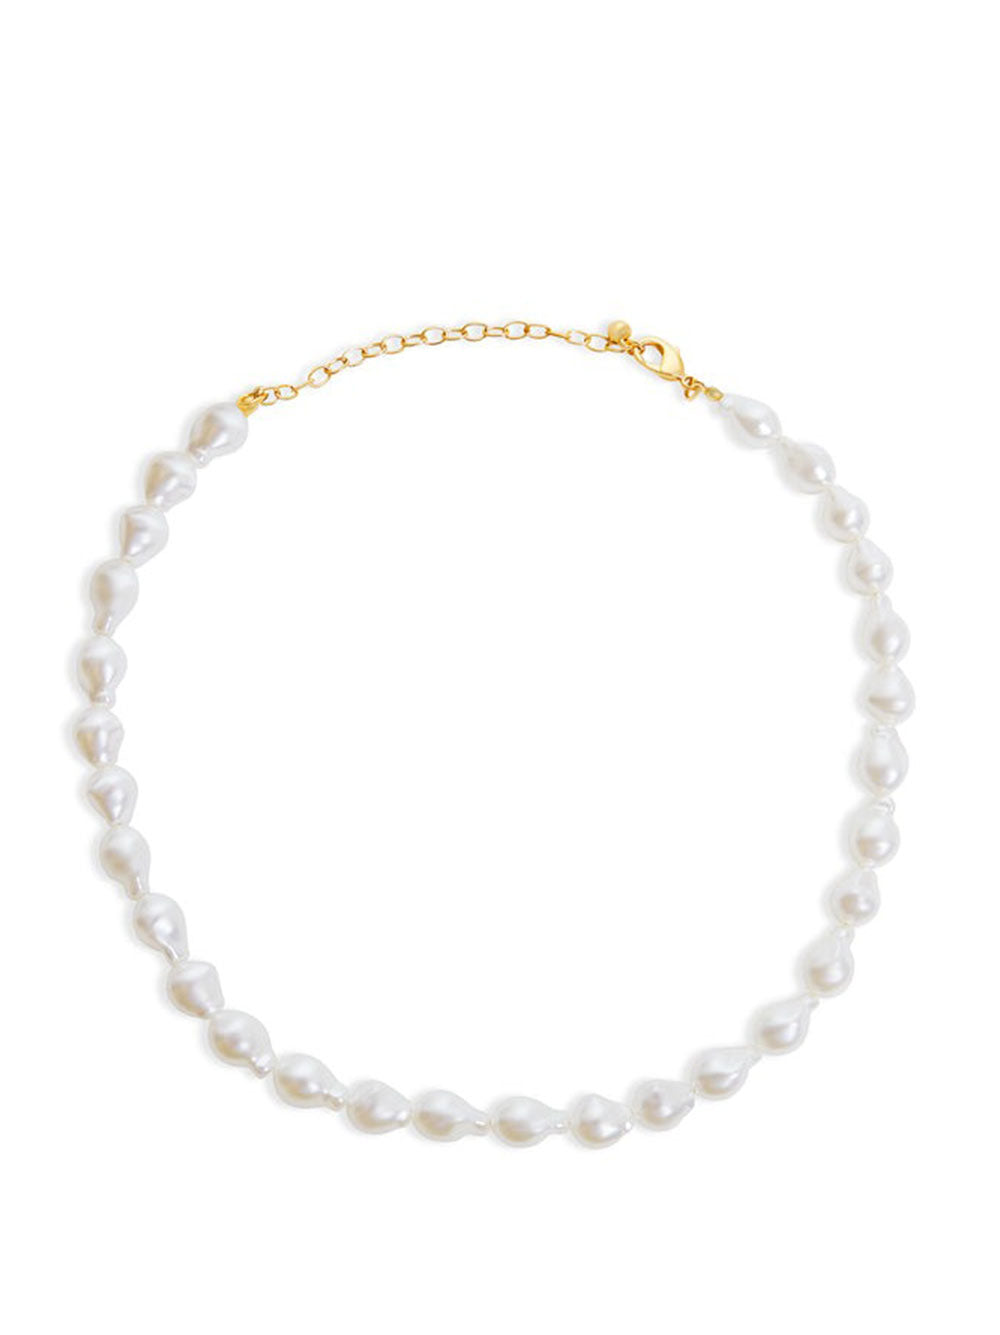 The M Jewelers The Milo Pearl Necklace